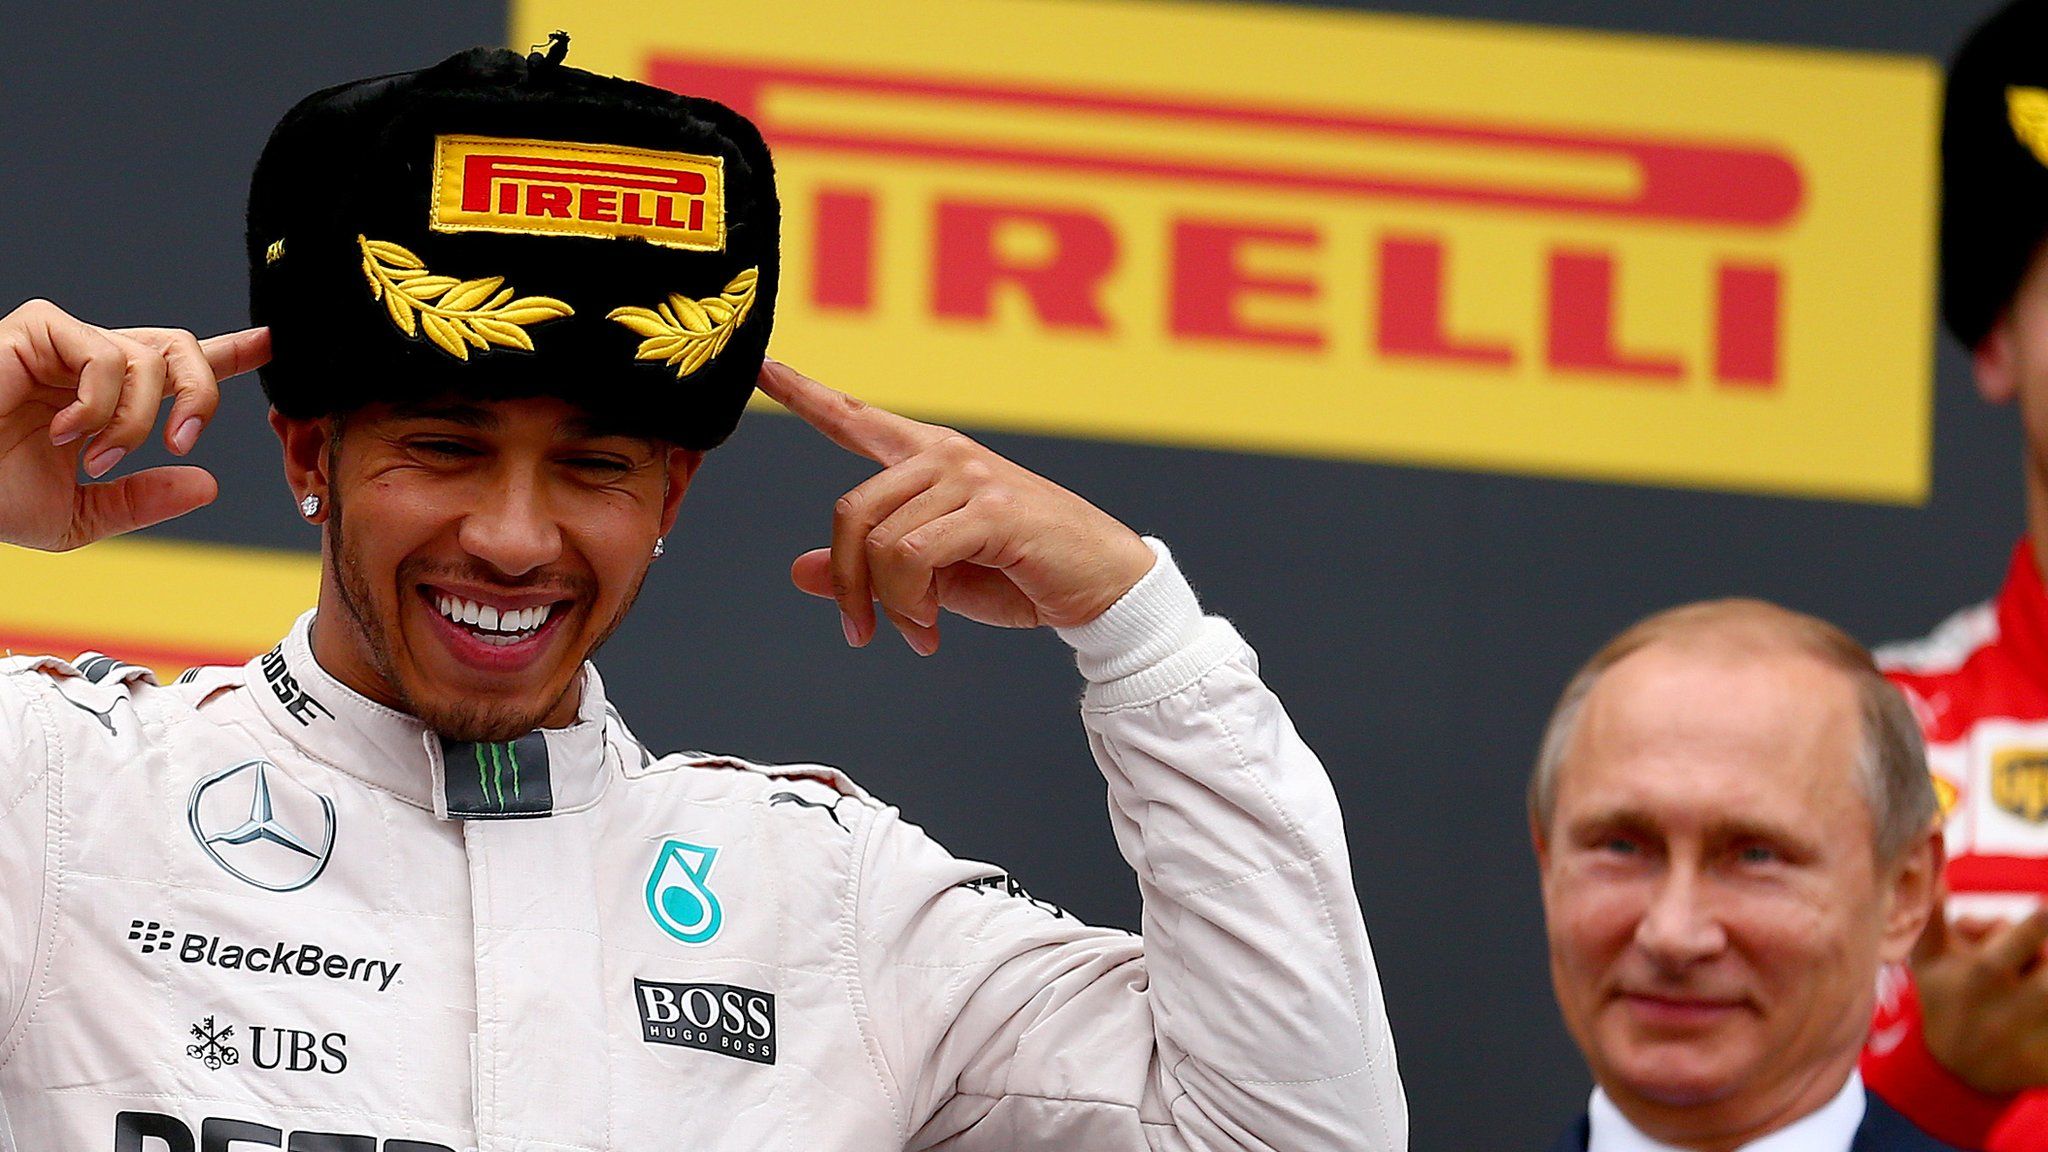 lewis hamilton at the russian gp with vladimir putin in the background